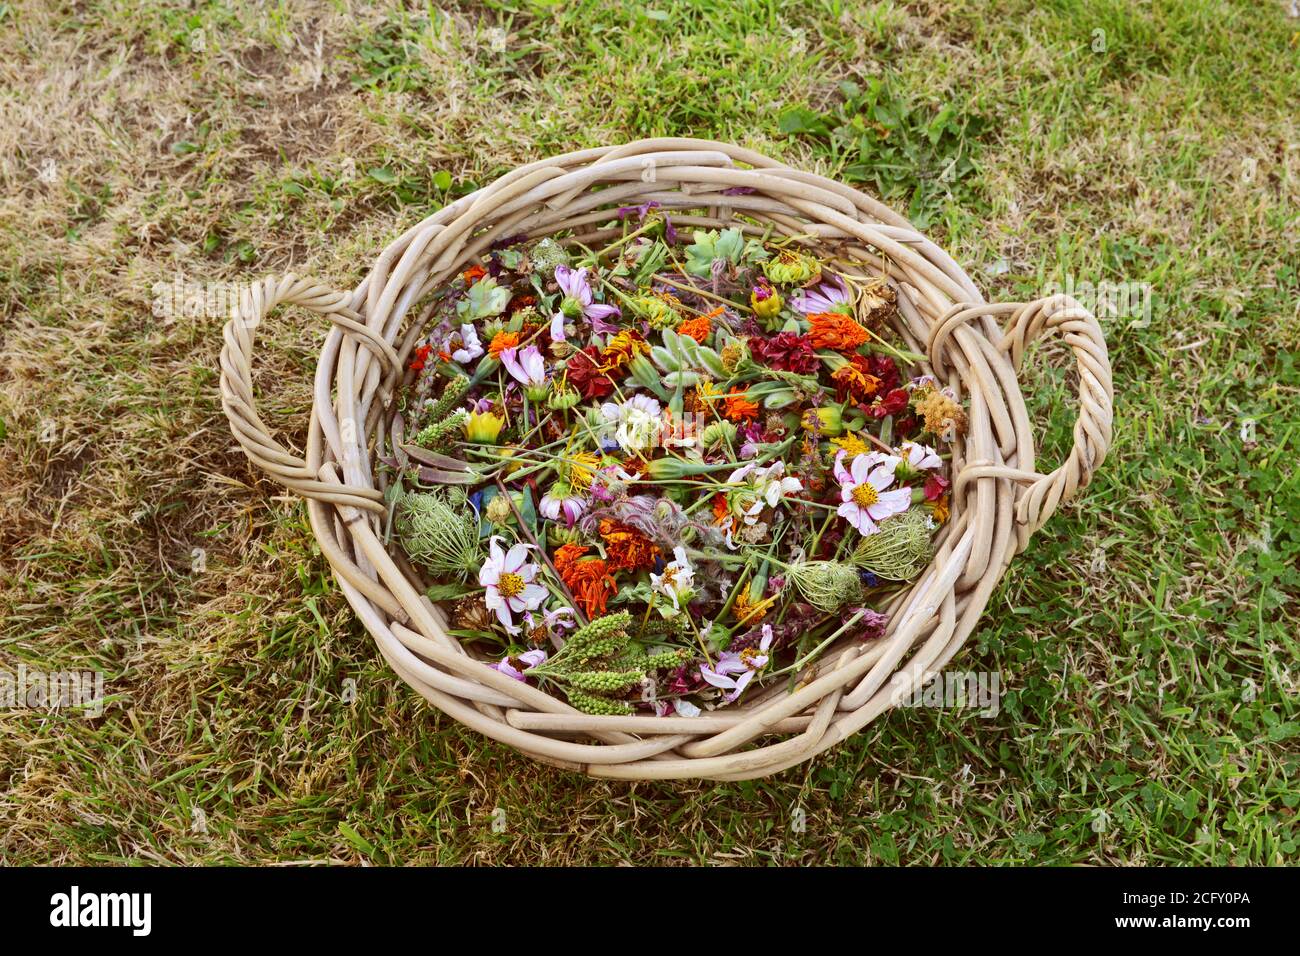 Large woven basket filled with faded garden flowers, plants deadheaded to encourage fresh flowers to grow Stock Photo